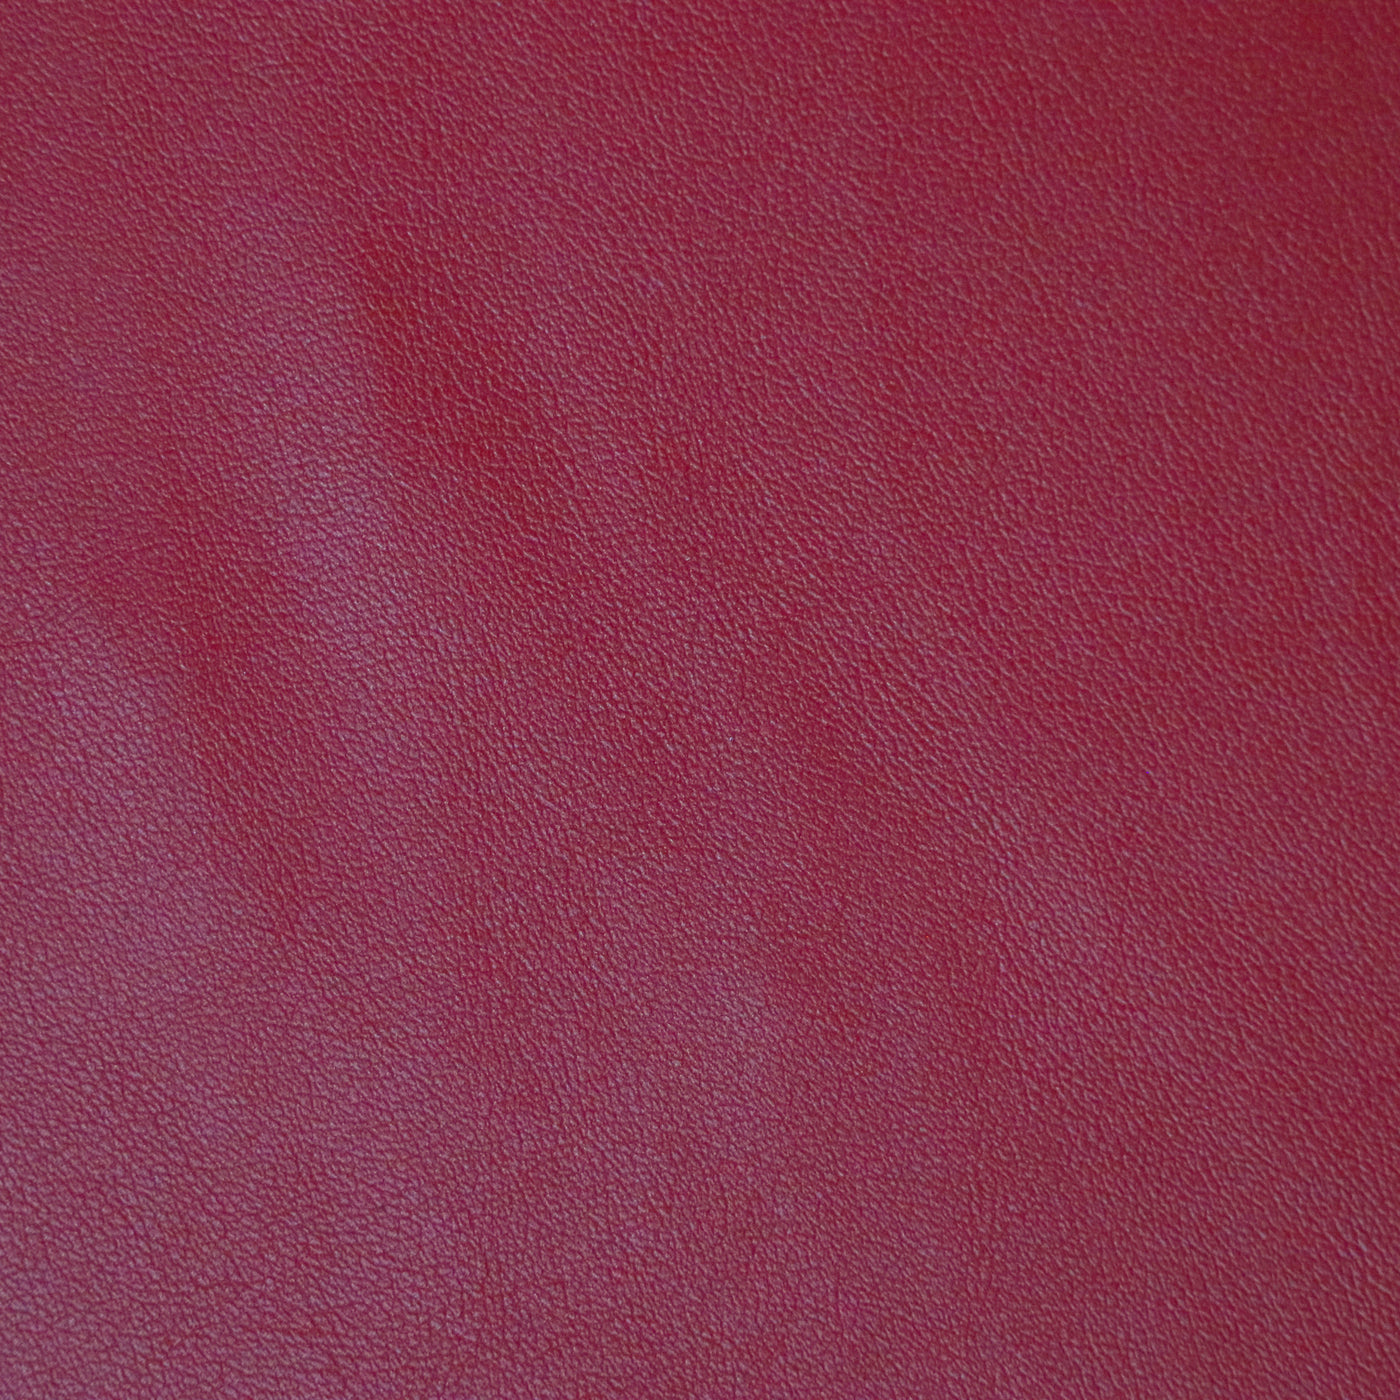 Cherry Lite Faux Leather